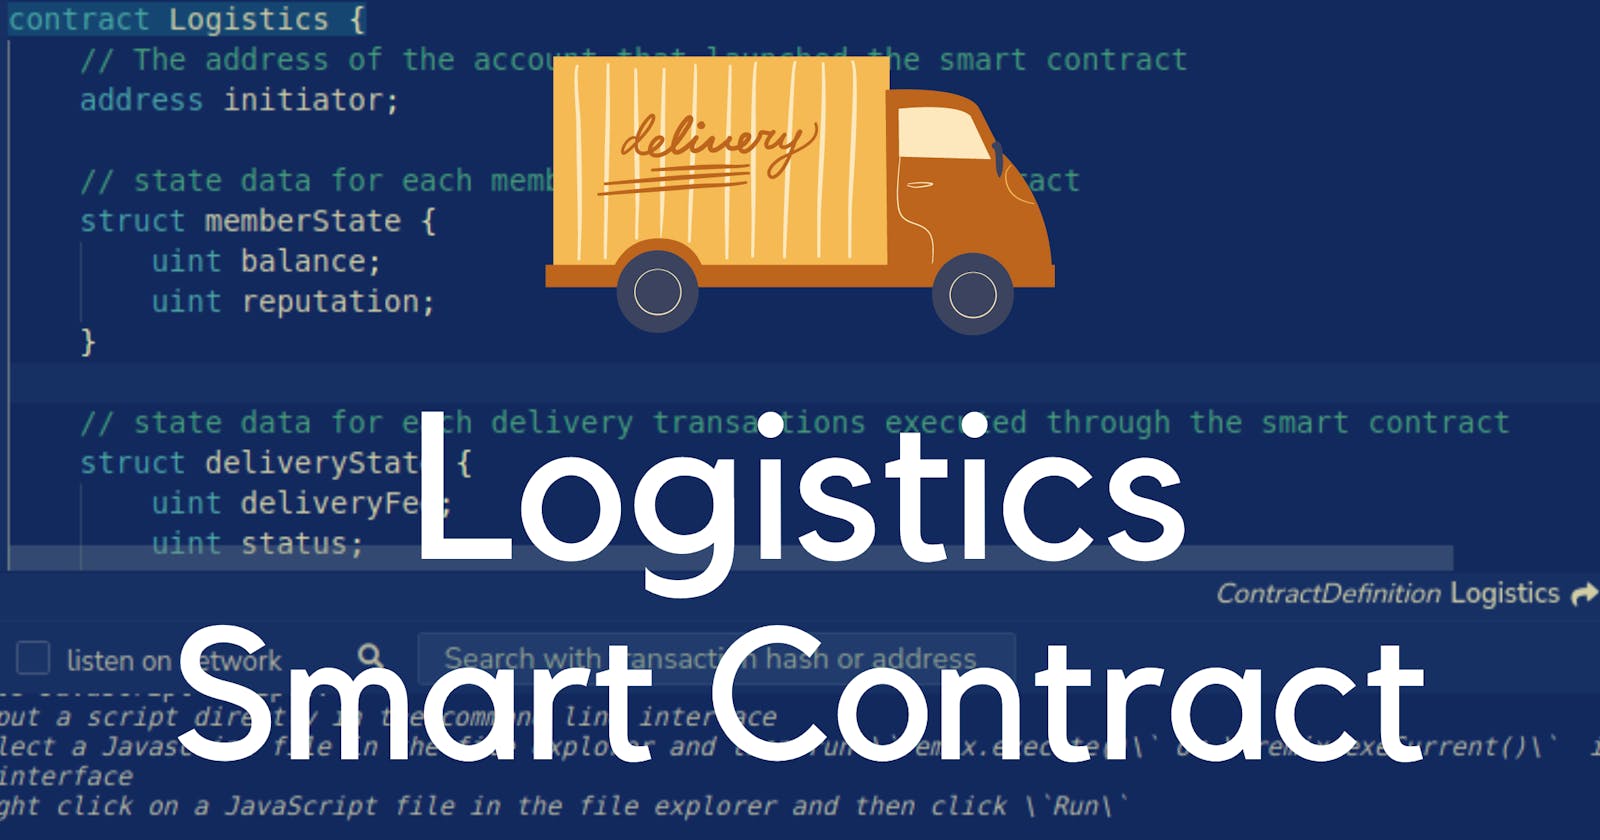 Building a Smart Contract for Logistics Companies.